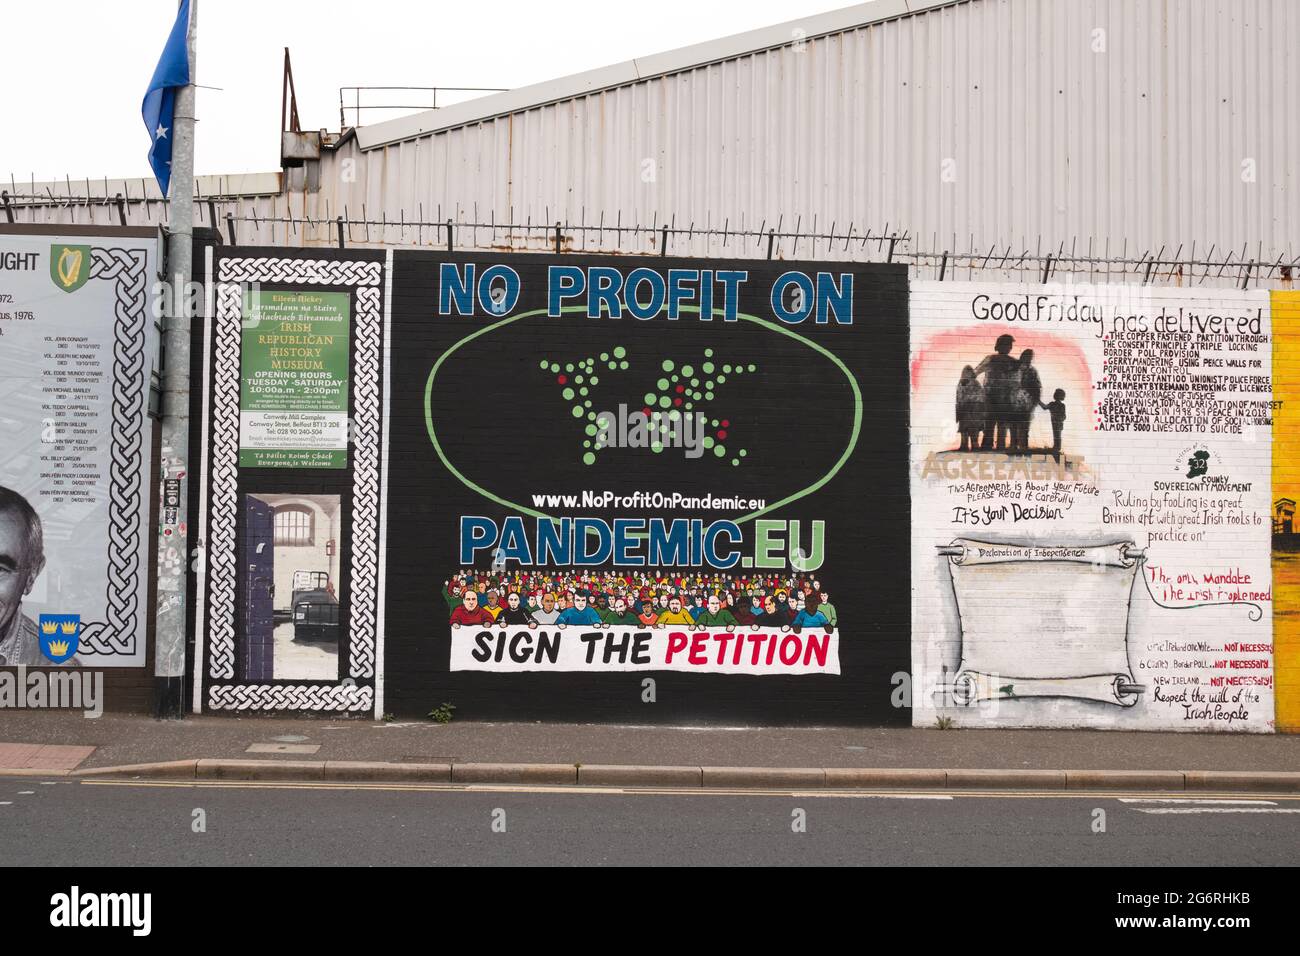 'No profit on pandemic' Murals Wall on Divis Road, Belfast, Northern Ireland. Picture date: 01 July 2021 Stock Photo